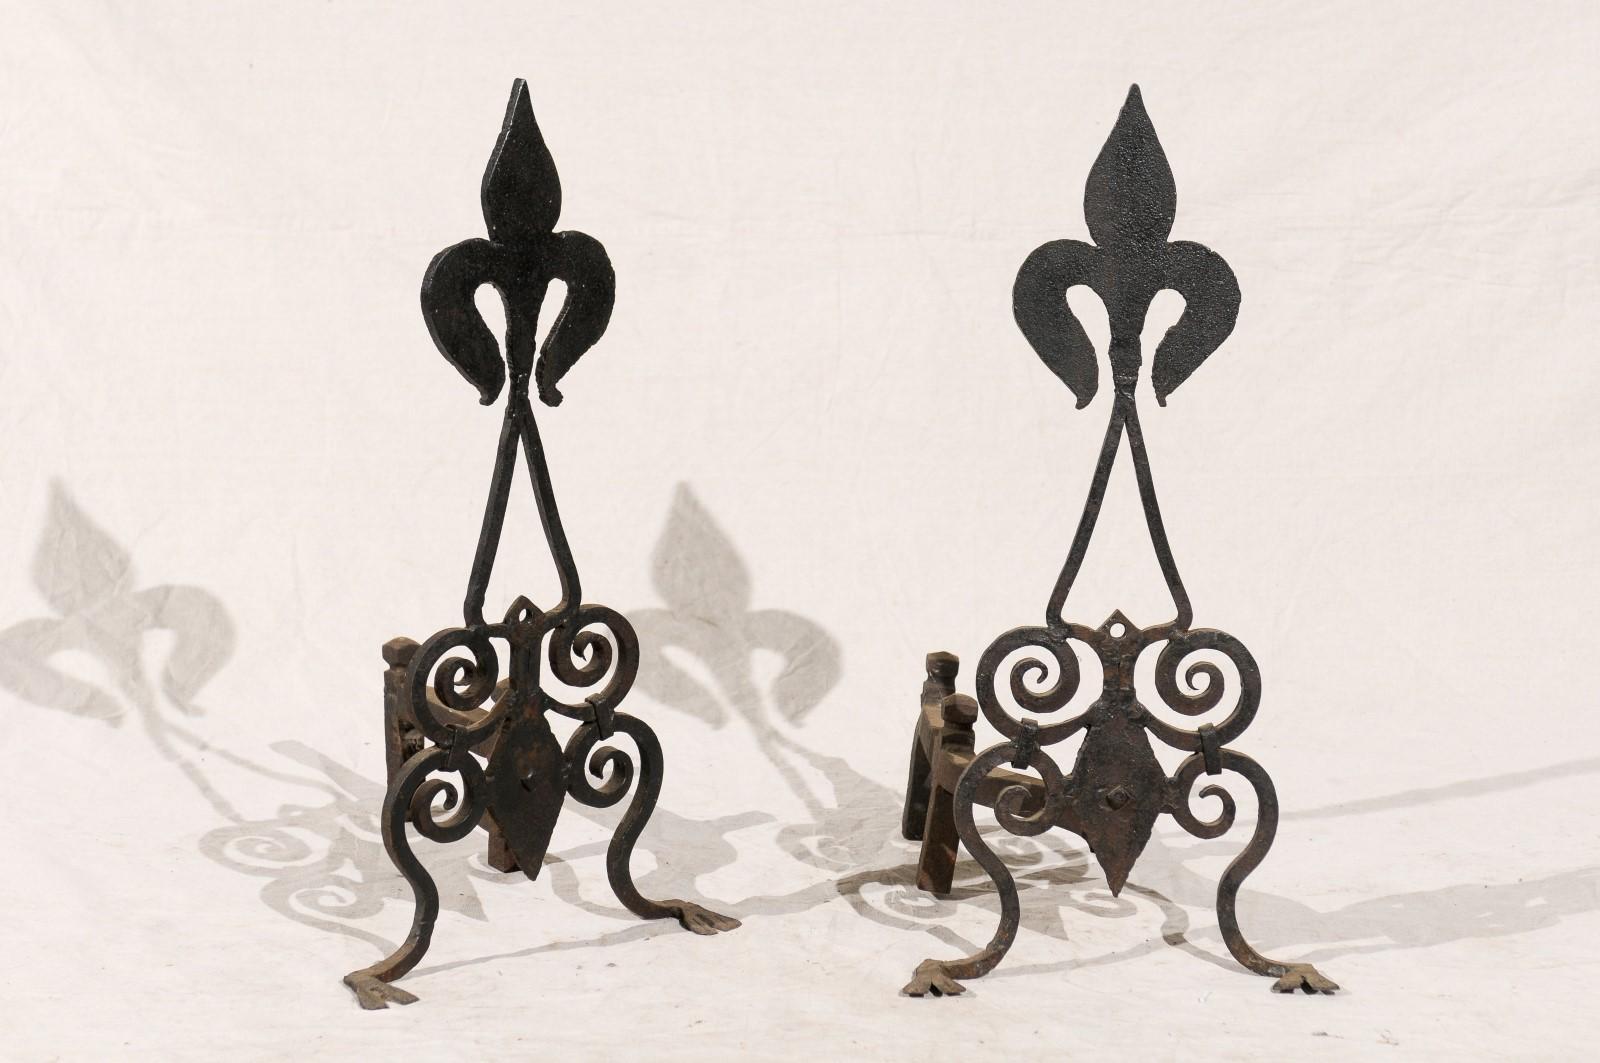 Pair of late 19th-early 20th century American black Fleur-de-Lis andirons
whimsical / naive.